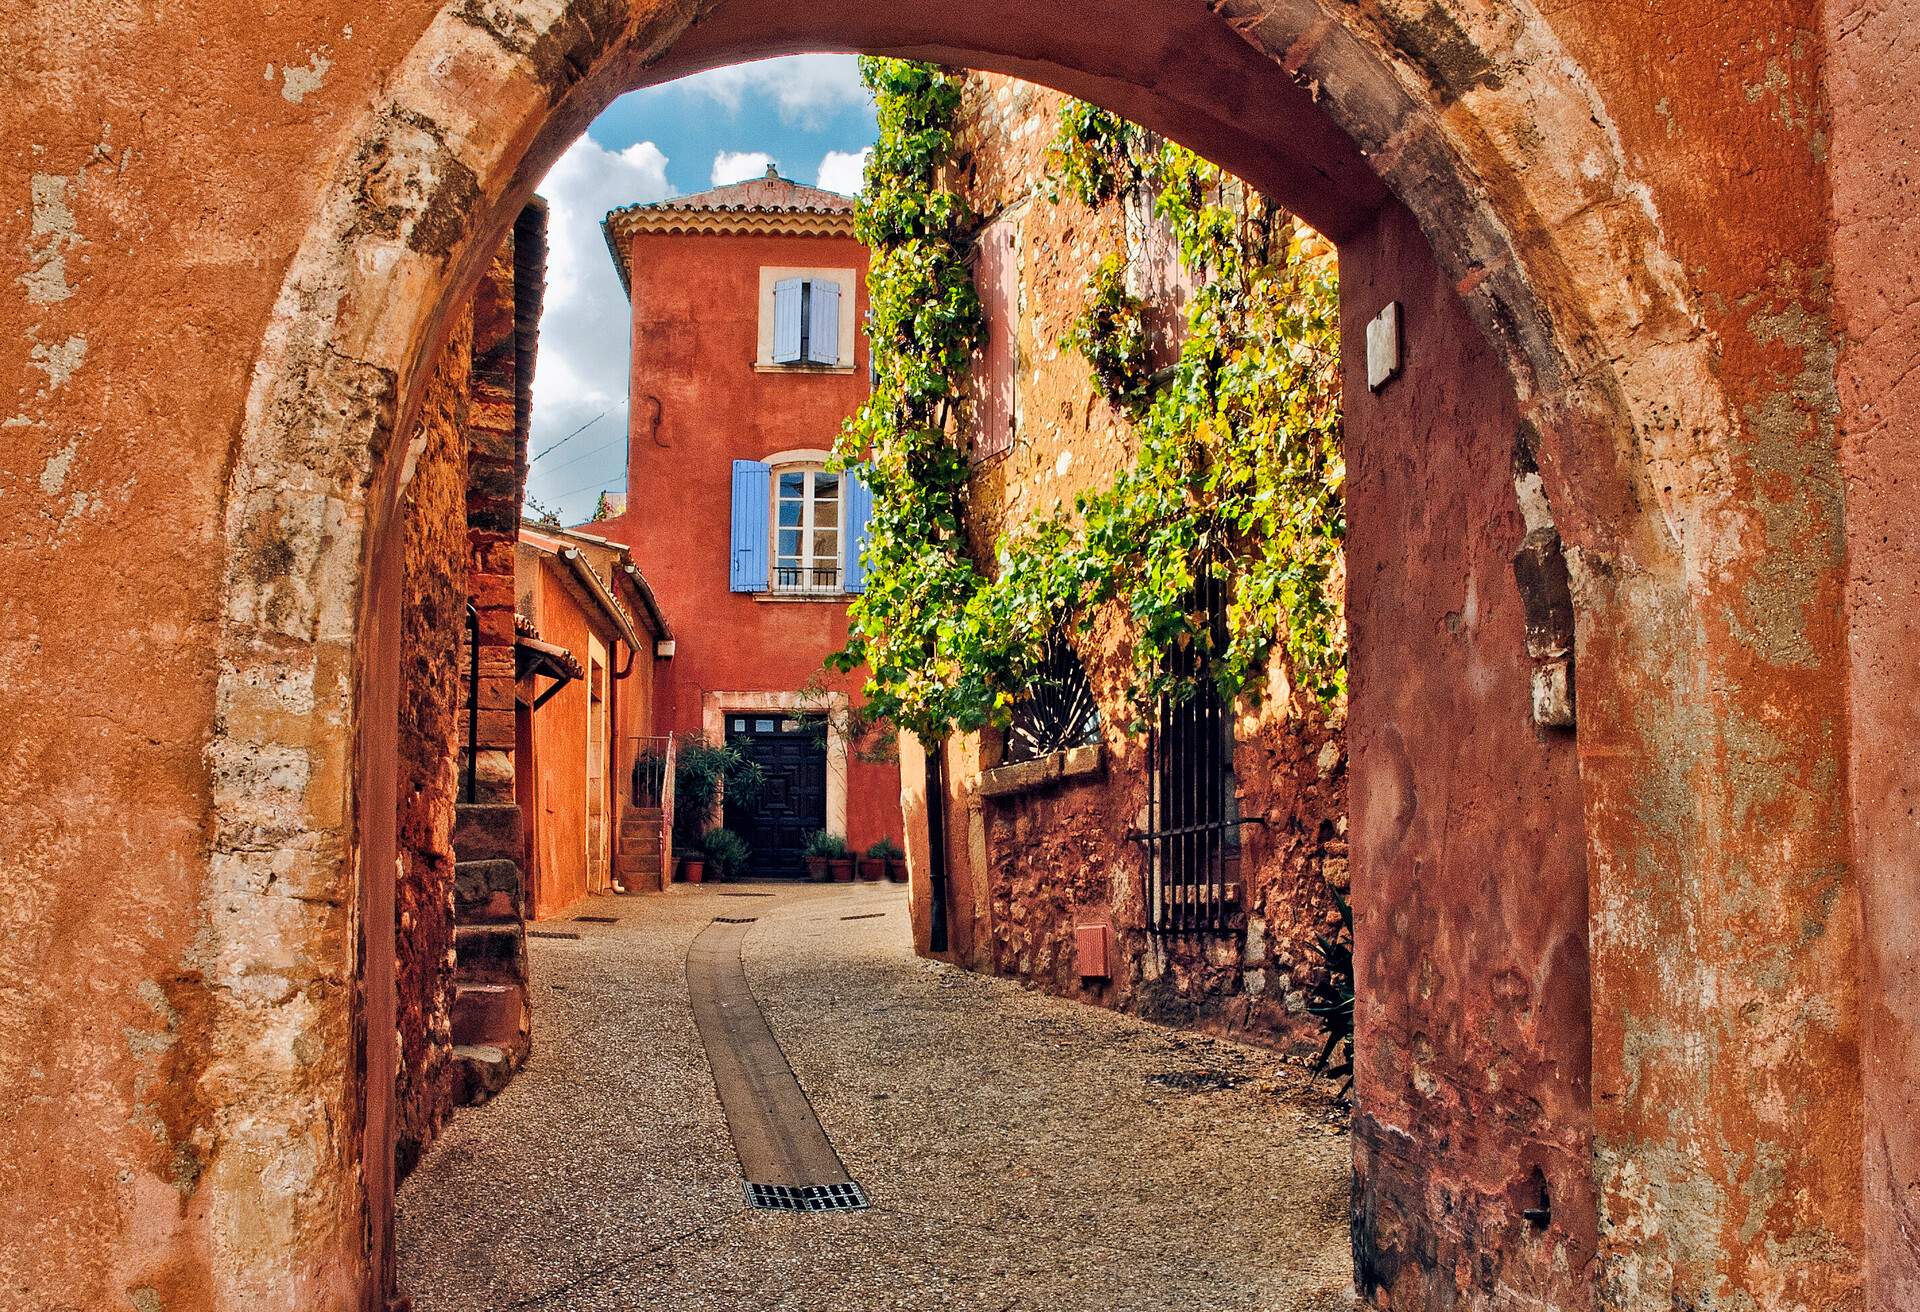 A view through the archway in the base of the clock tower in Roussillon, a hill town built out of red, yellow and orange ochre in the Luberon, the mountainous area in the northern part of Provence, France.